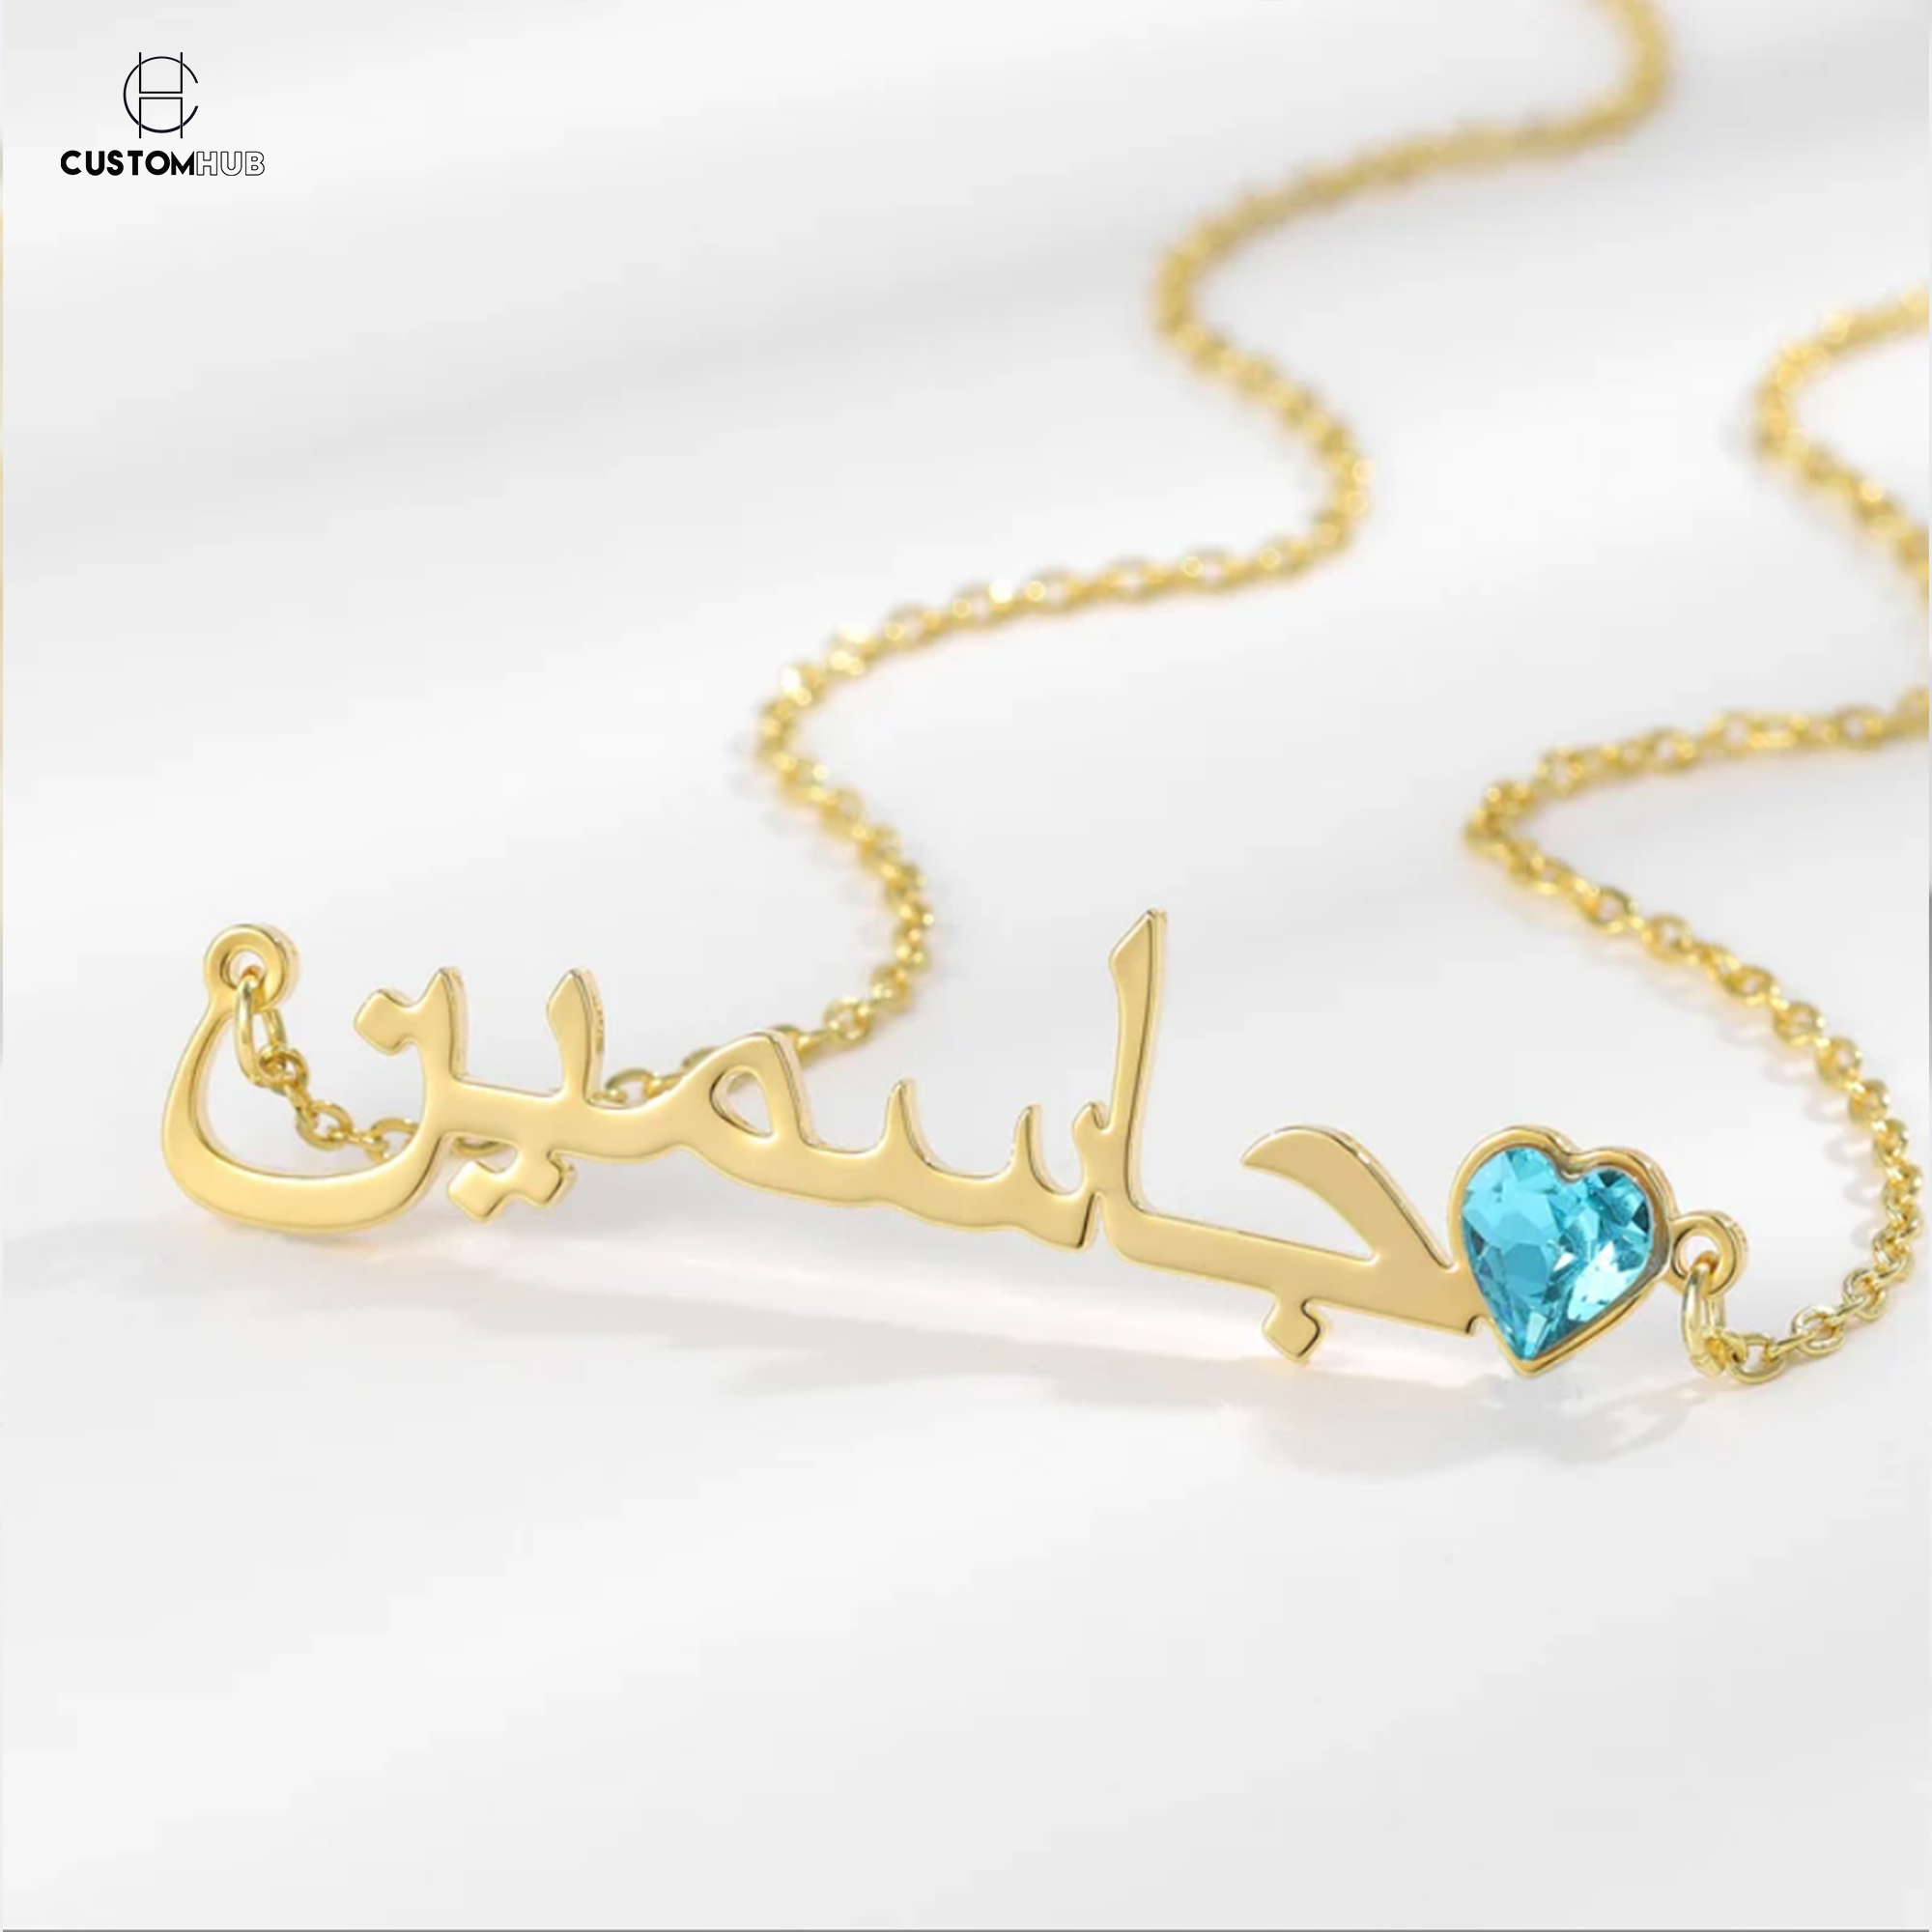 Personalized Arabic Name Necklace with Birthstone